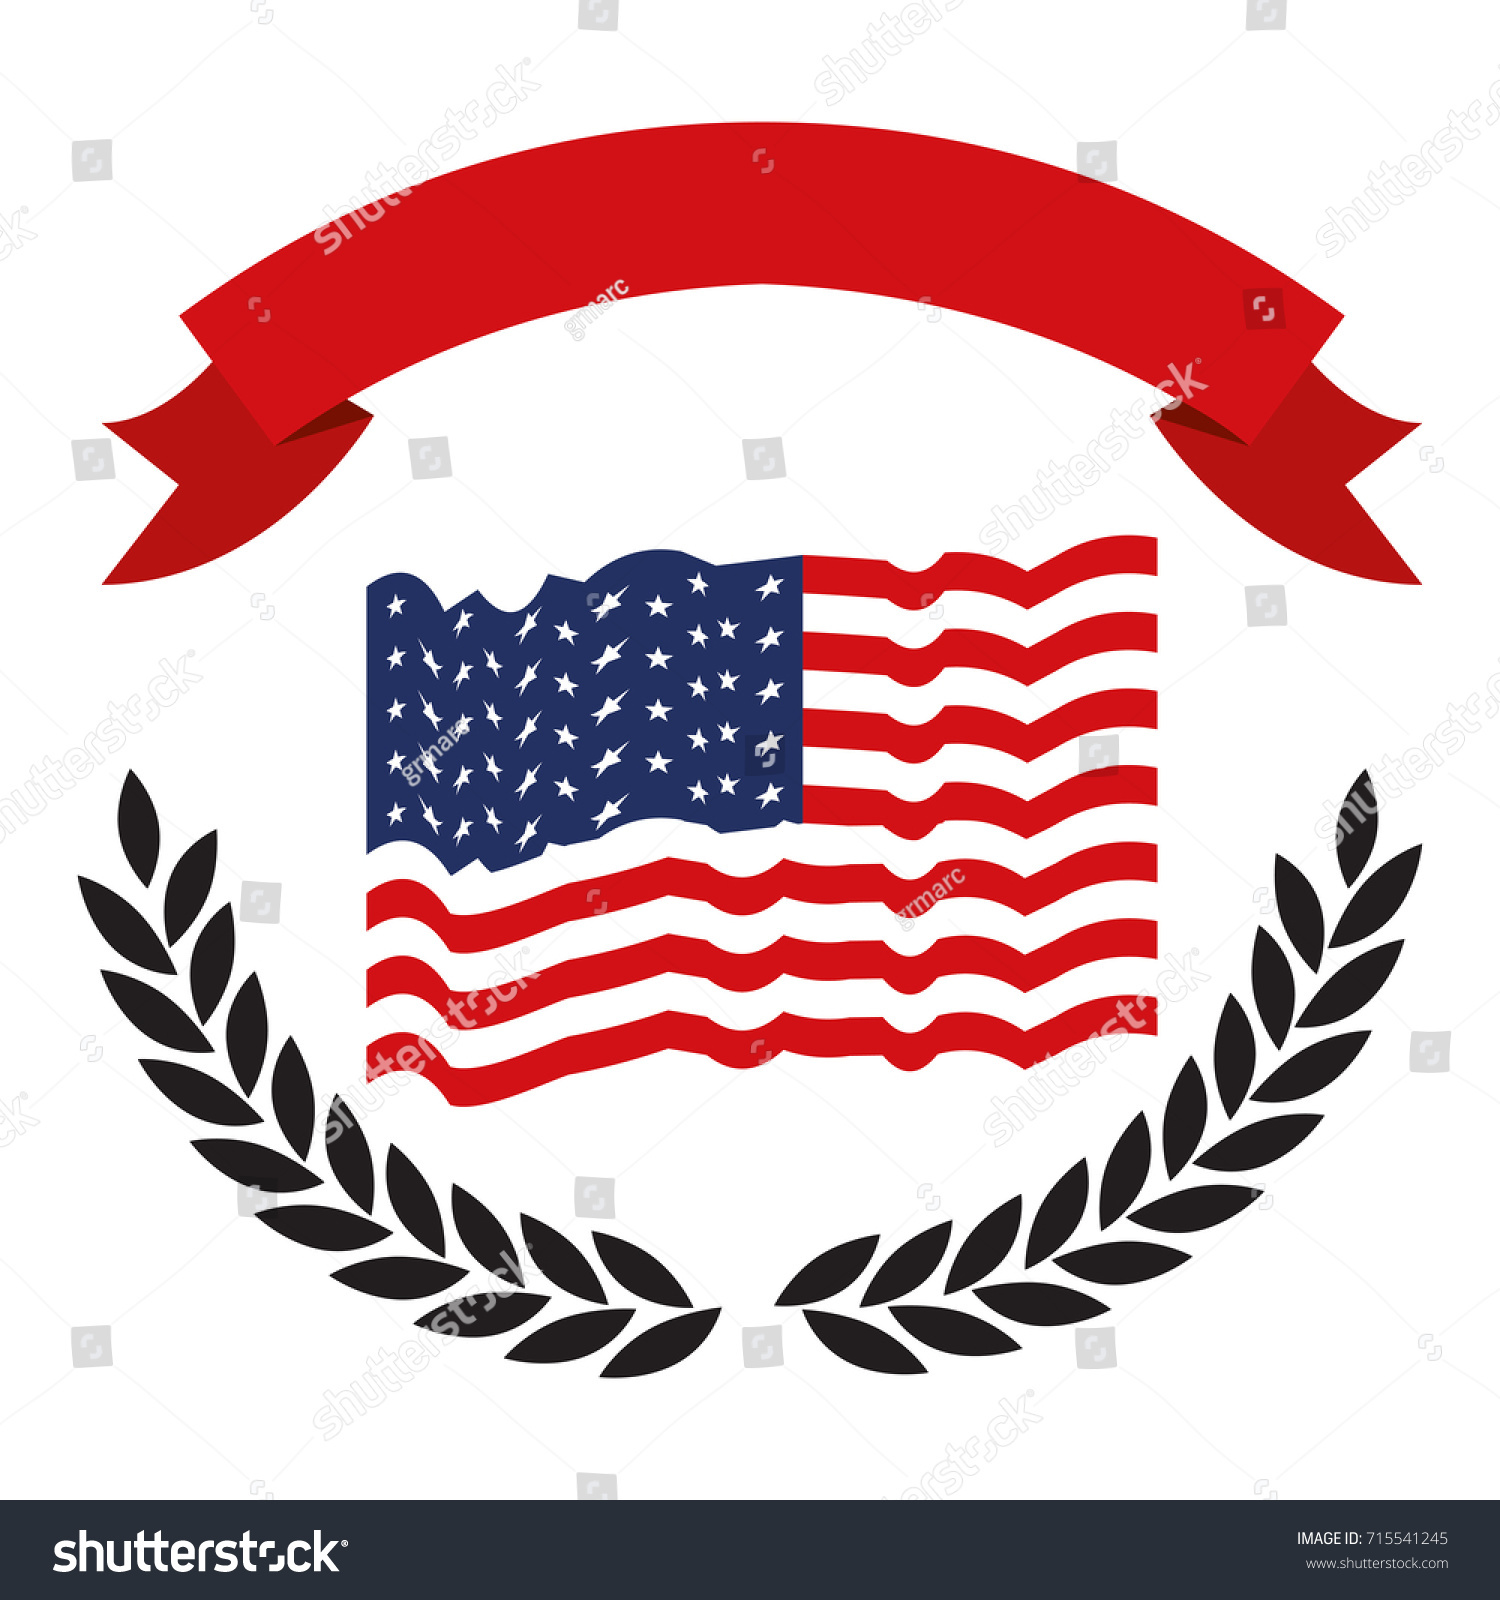 SVG of united states flag with black olive branch arch on bottom and thick red ribbon on top vector illustration svg